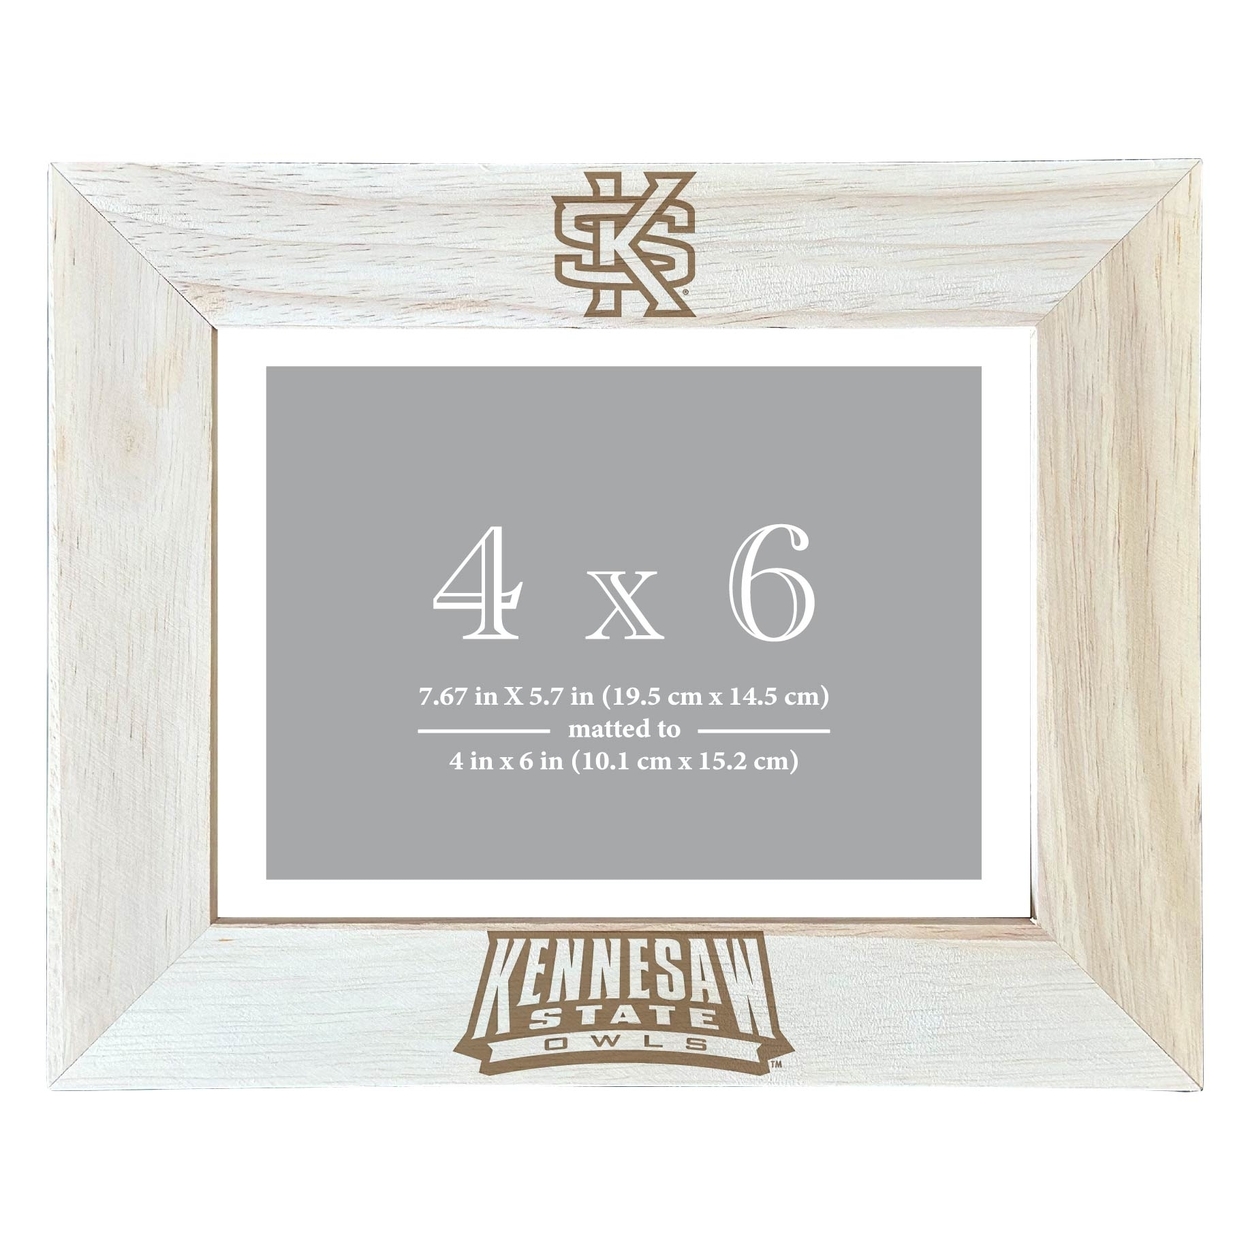 Kennesaw State University Wooden Photo Frame Matted To 4 X 6 Inch - Etched